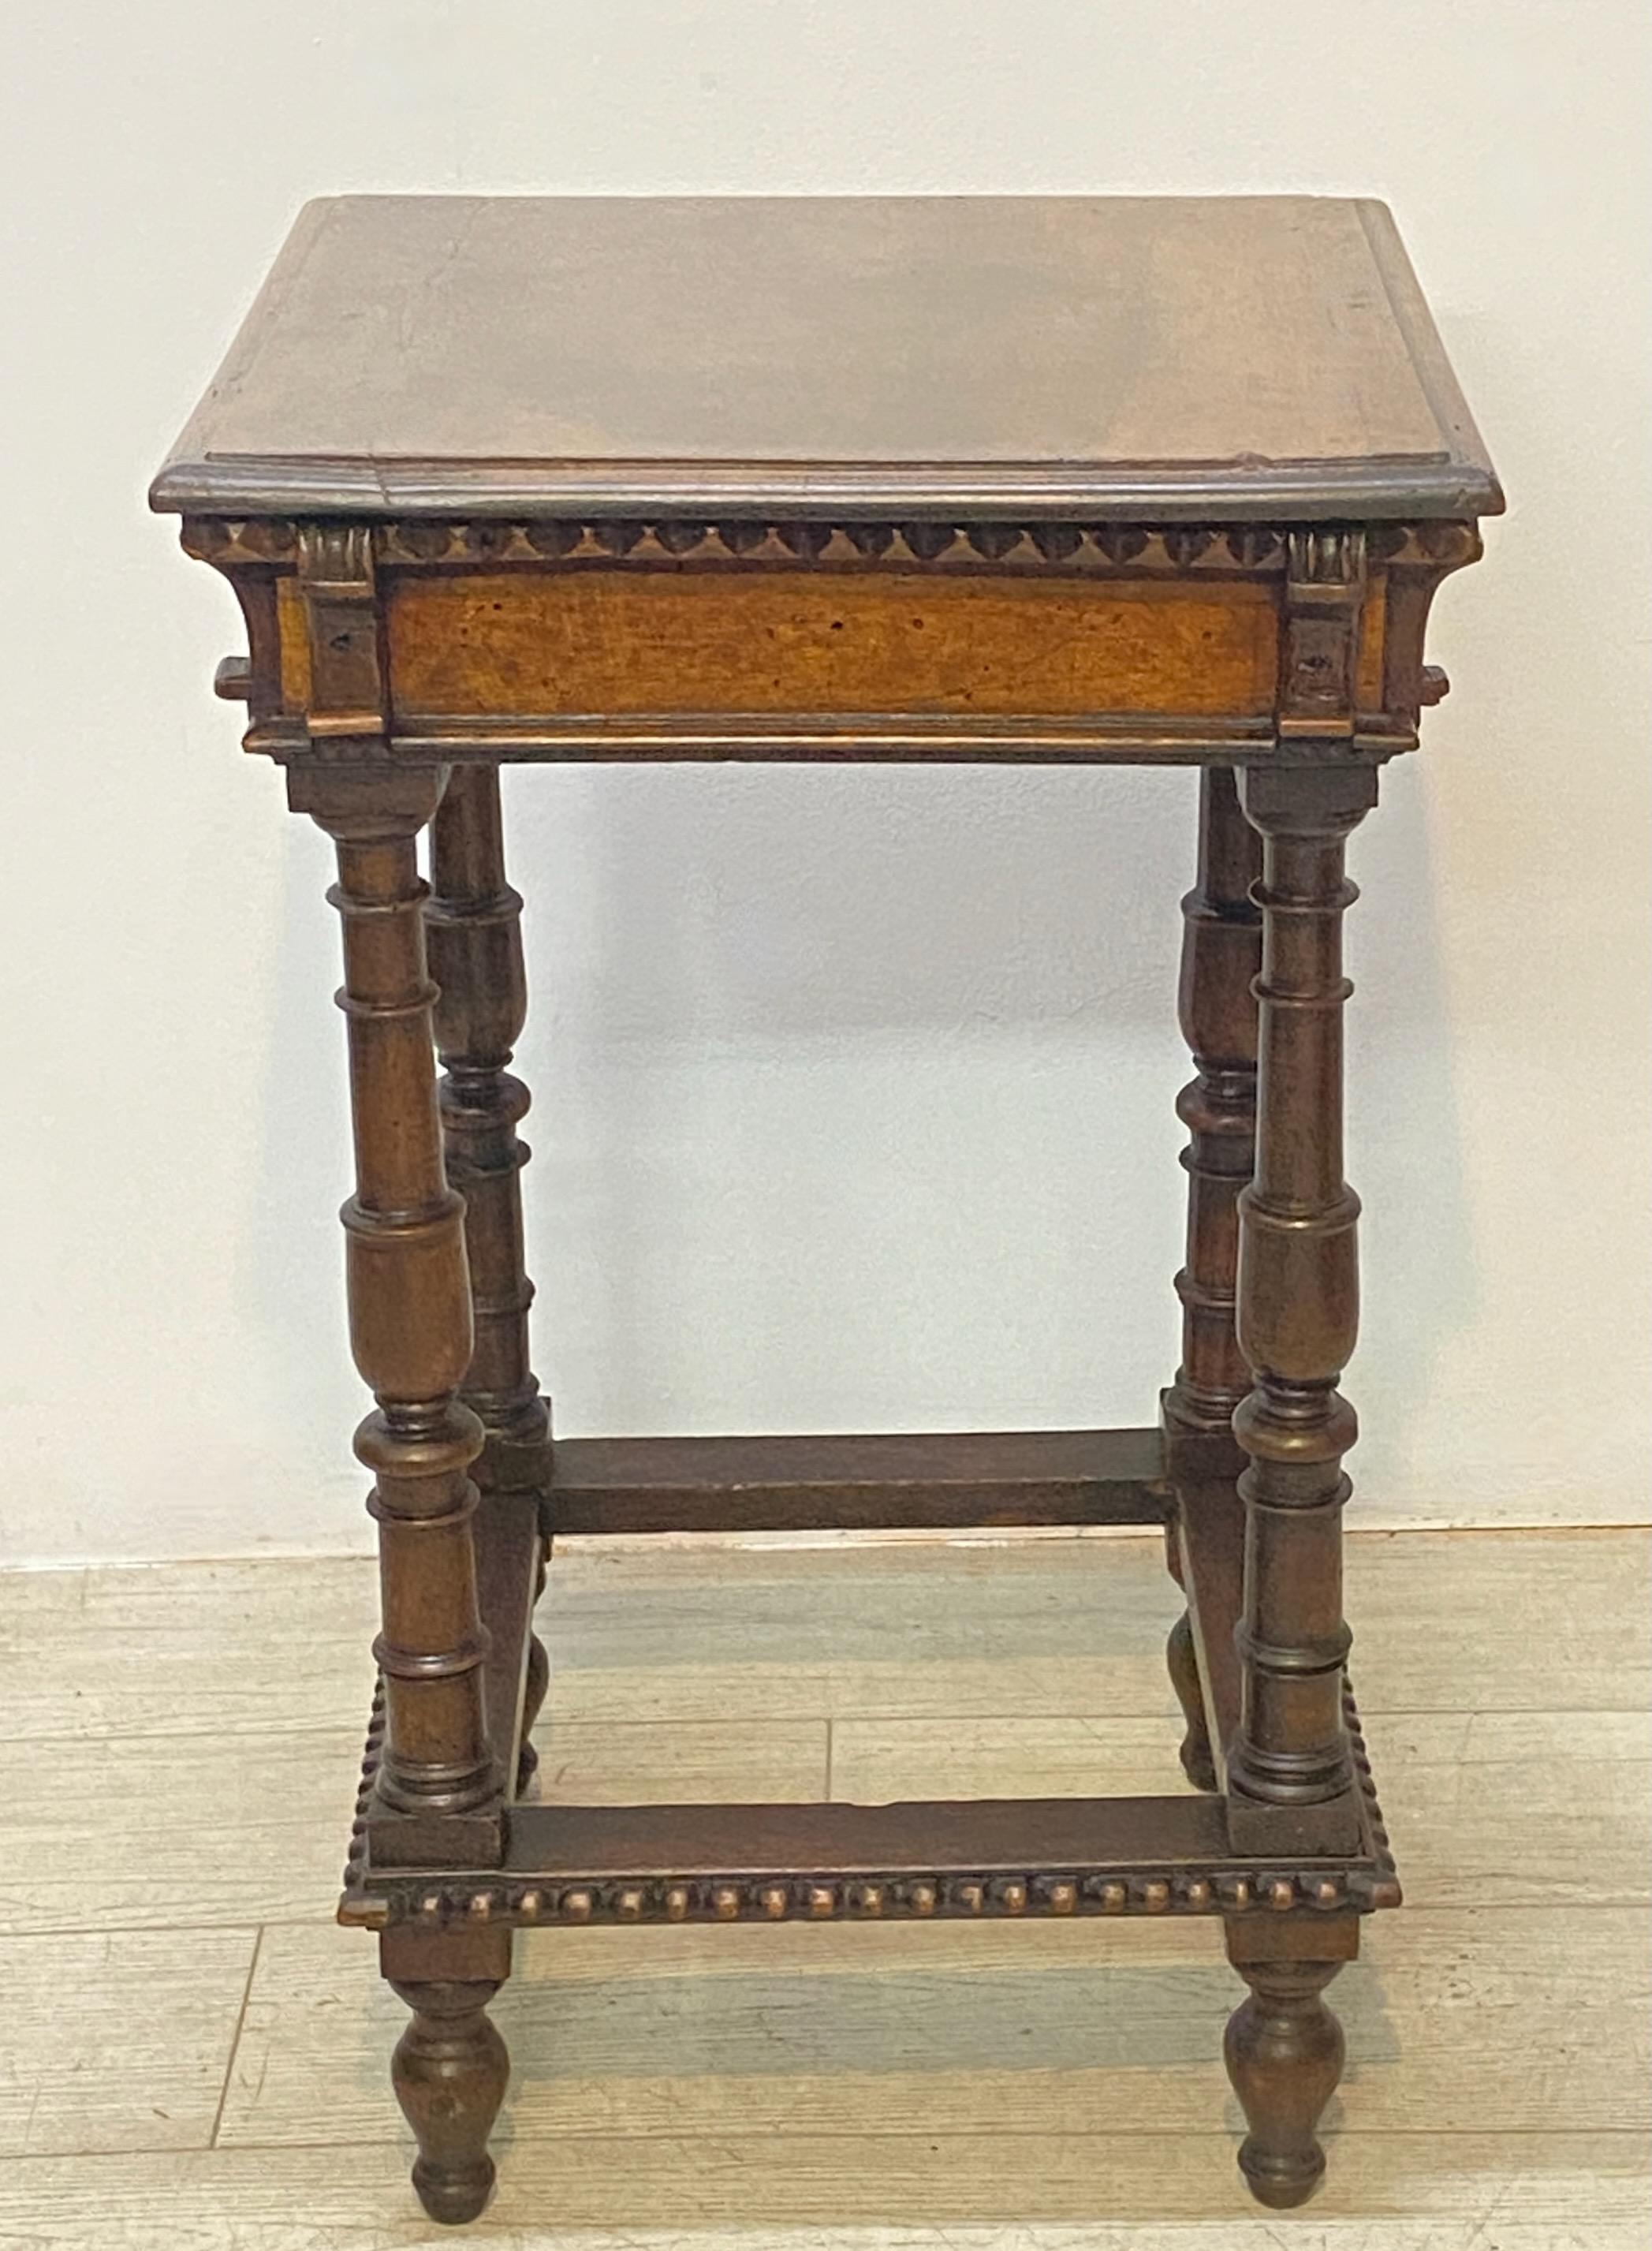 A solid carved walnut side table made up of some (17th century) period parts, likely assembled in the mid to late 19th century.
 